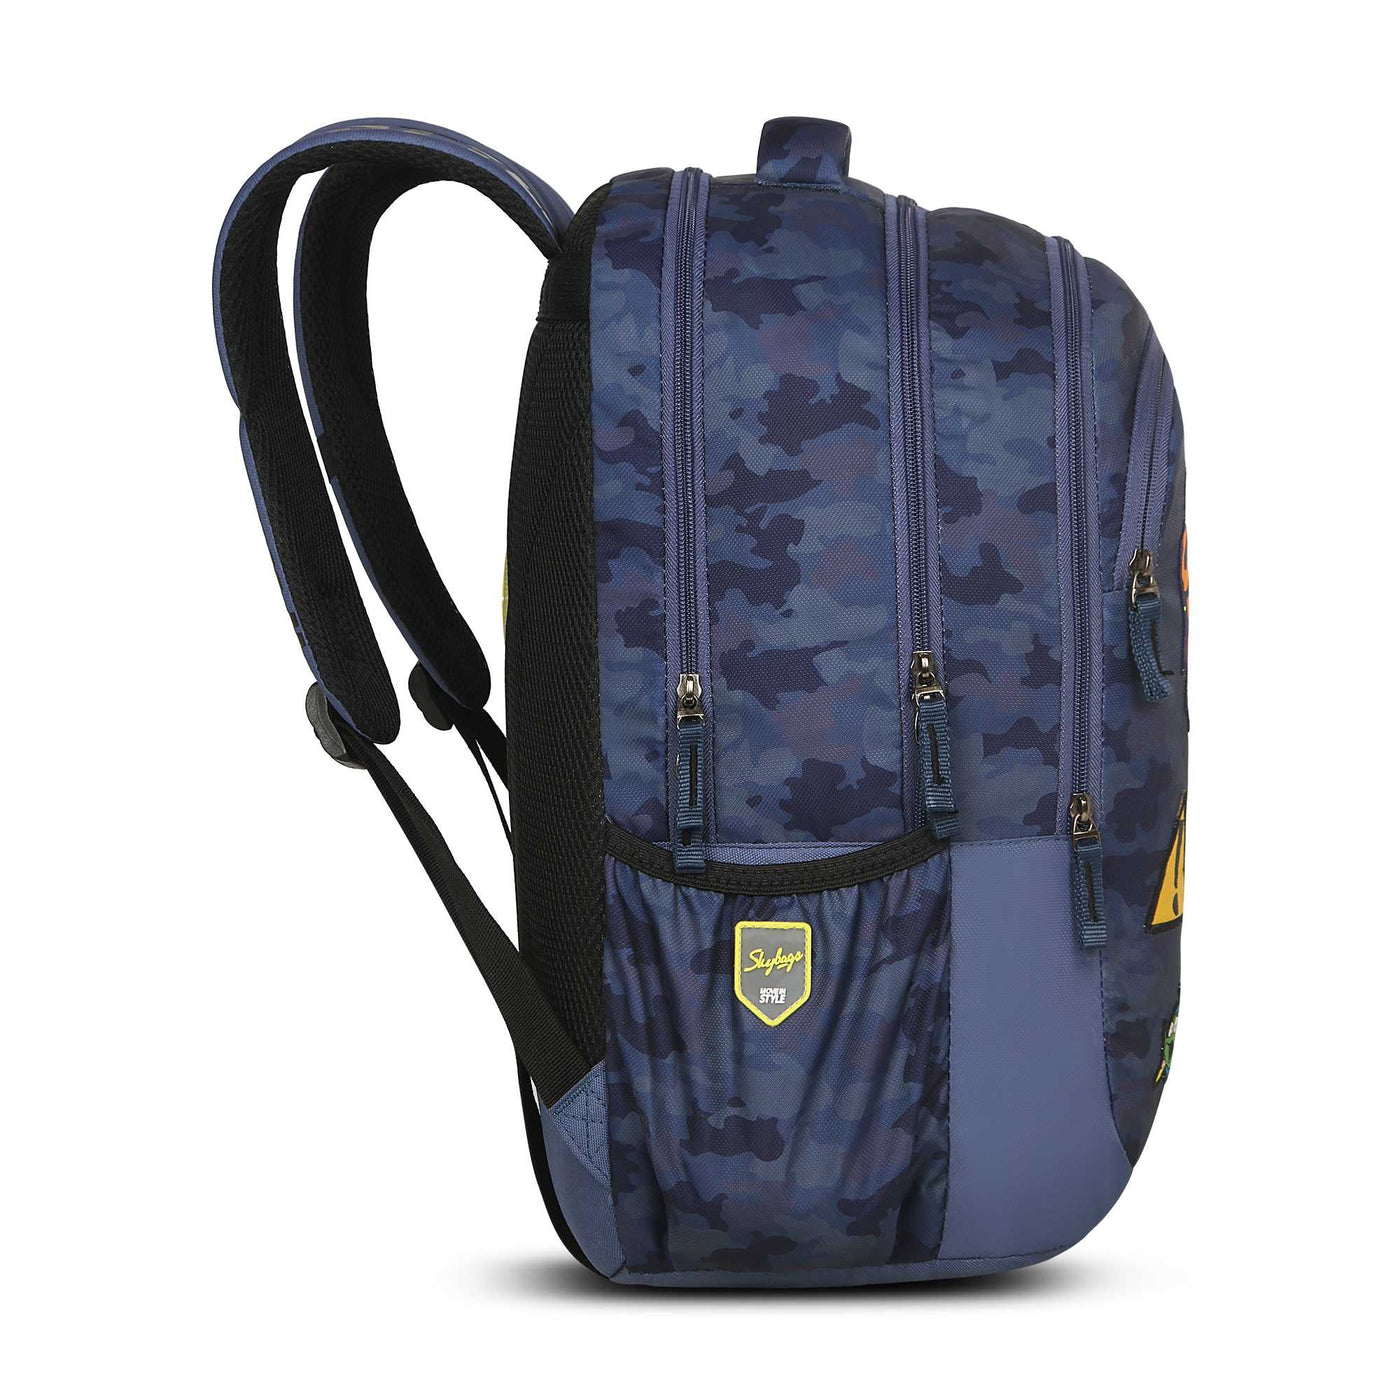 Skybags Squad  09 "School Backpack Camo"